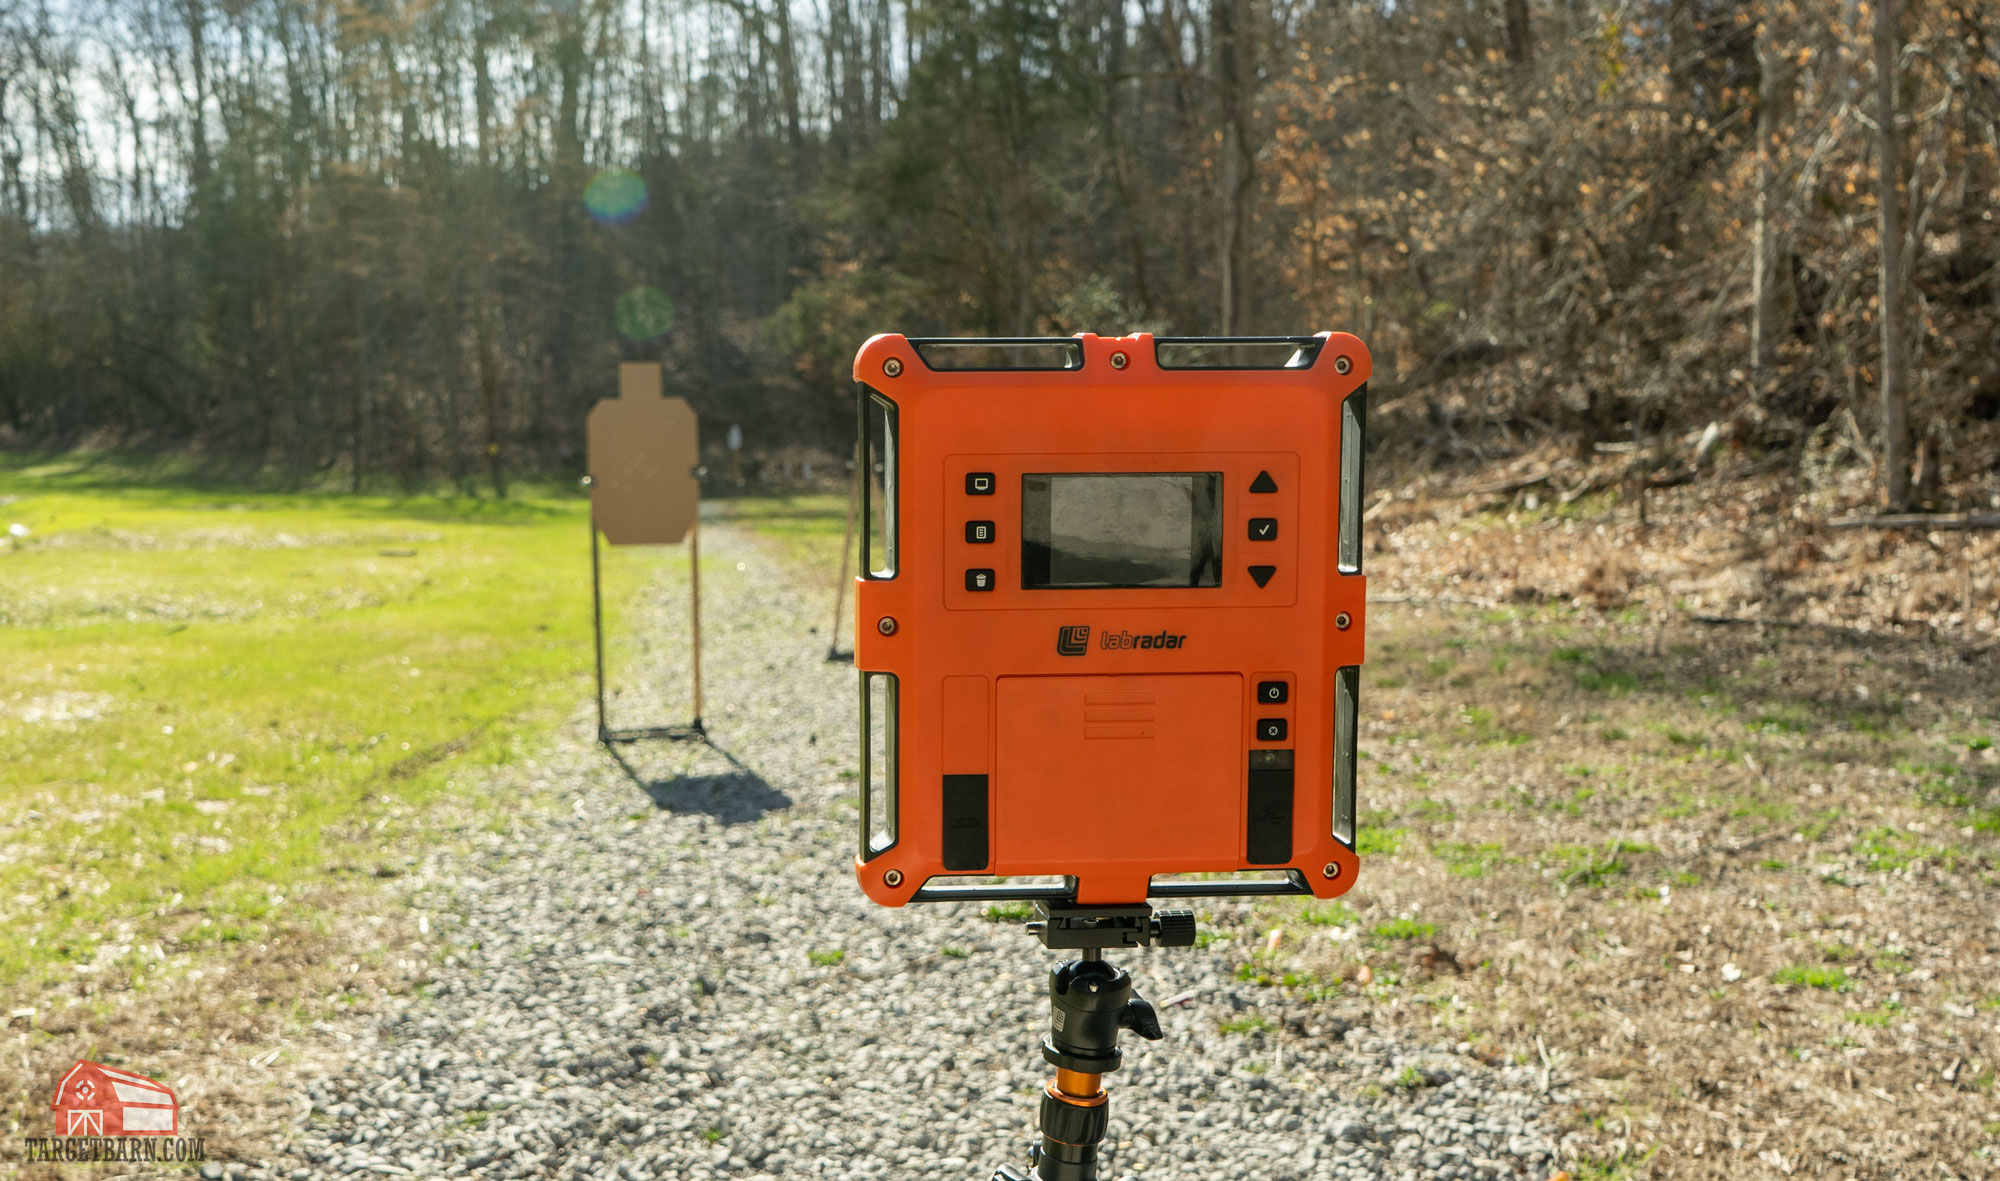 a chronograph at the range in front of a cardboard target